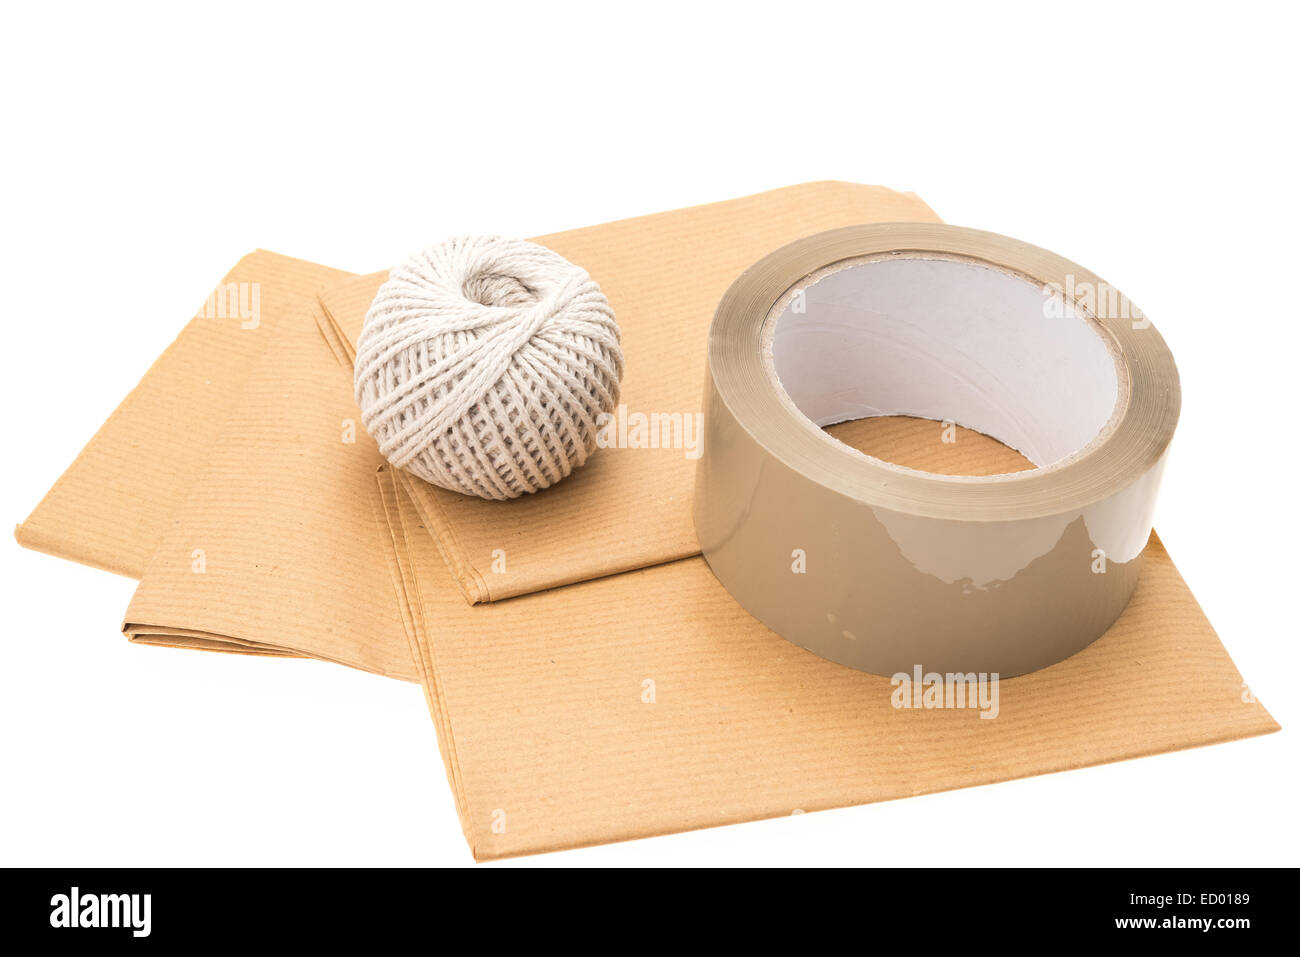 Three essential items for a successfully wrapped package - wrapping paper, string and strong parcel tape - white background Stock Photo